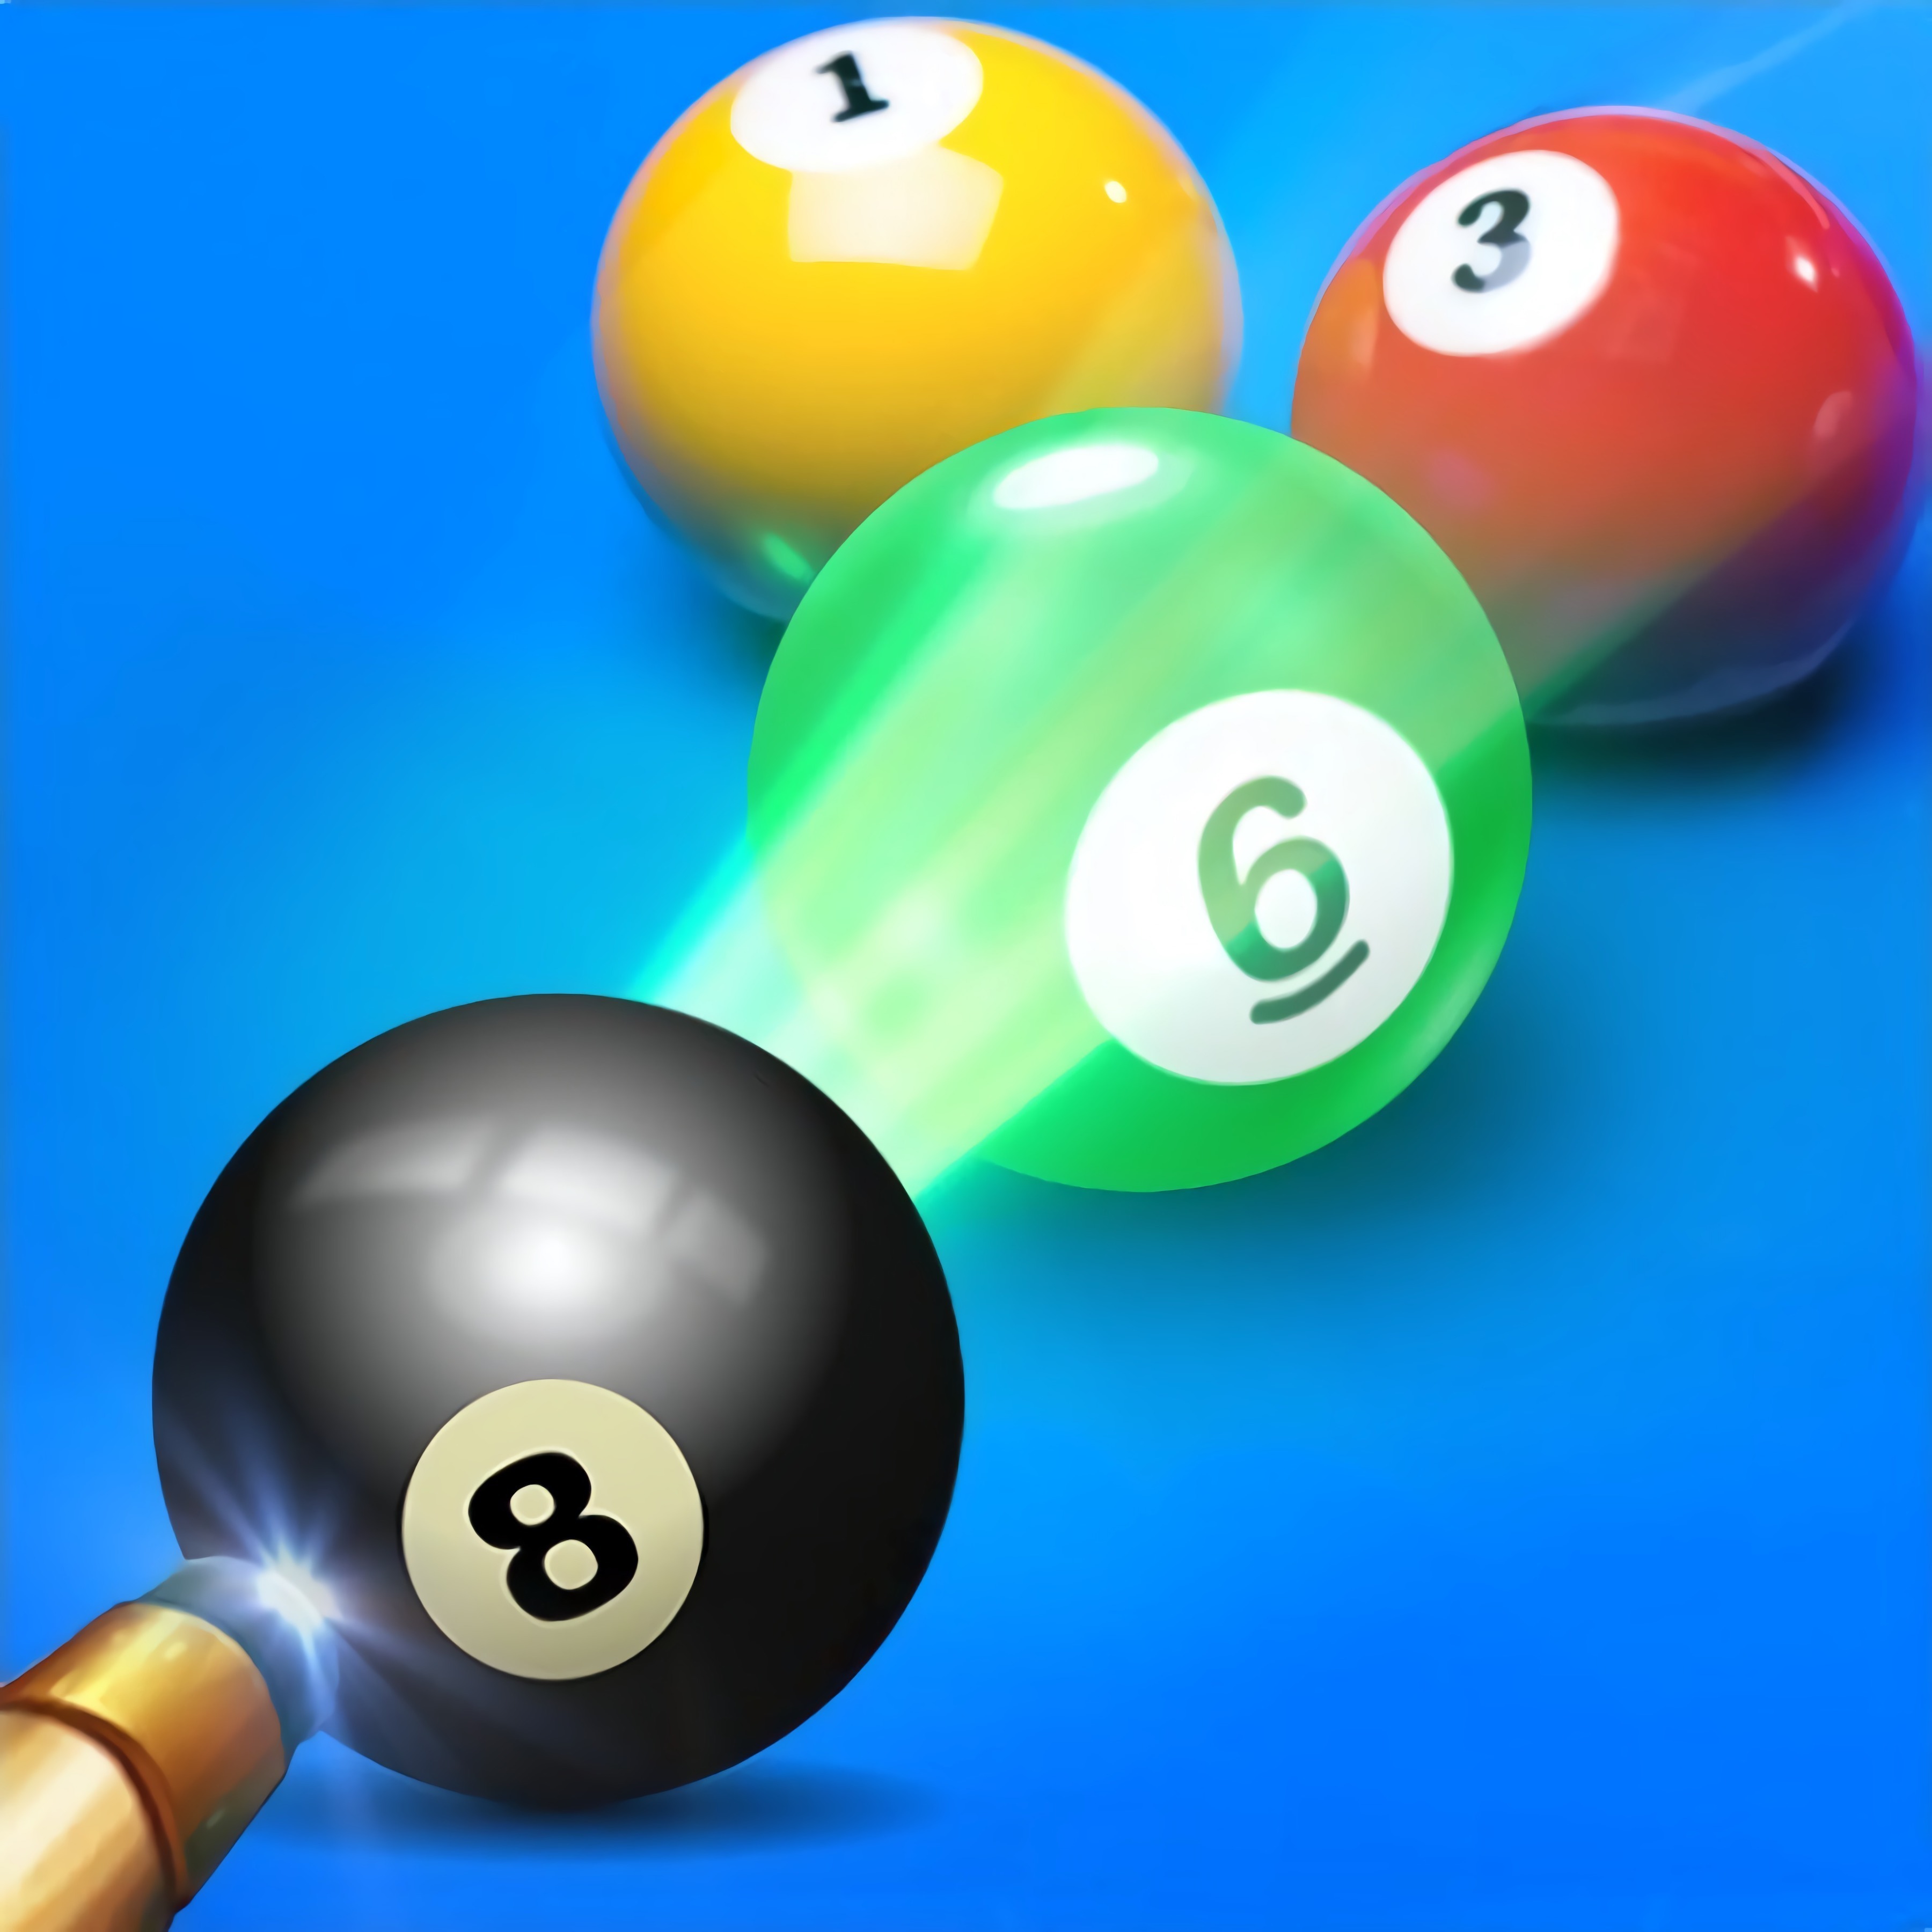 play free online pool games no download